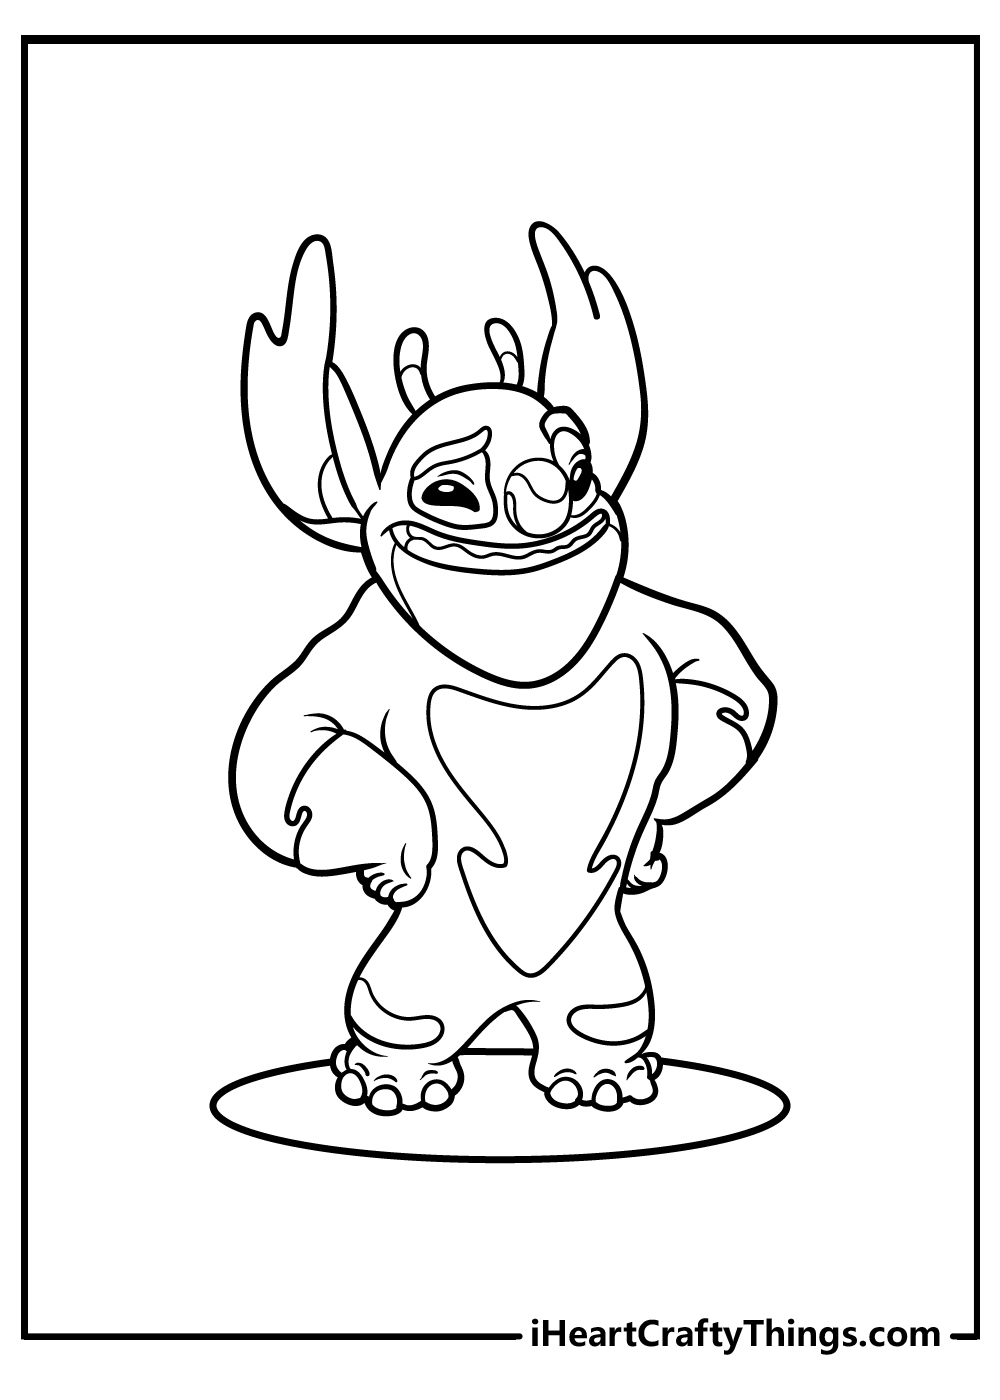 Lilo & Stitch Coloring Pages Updated 20